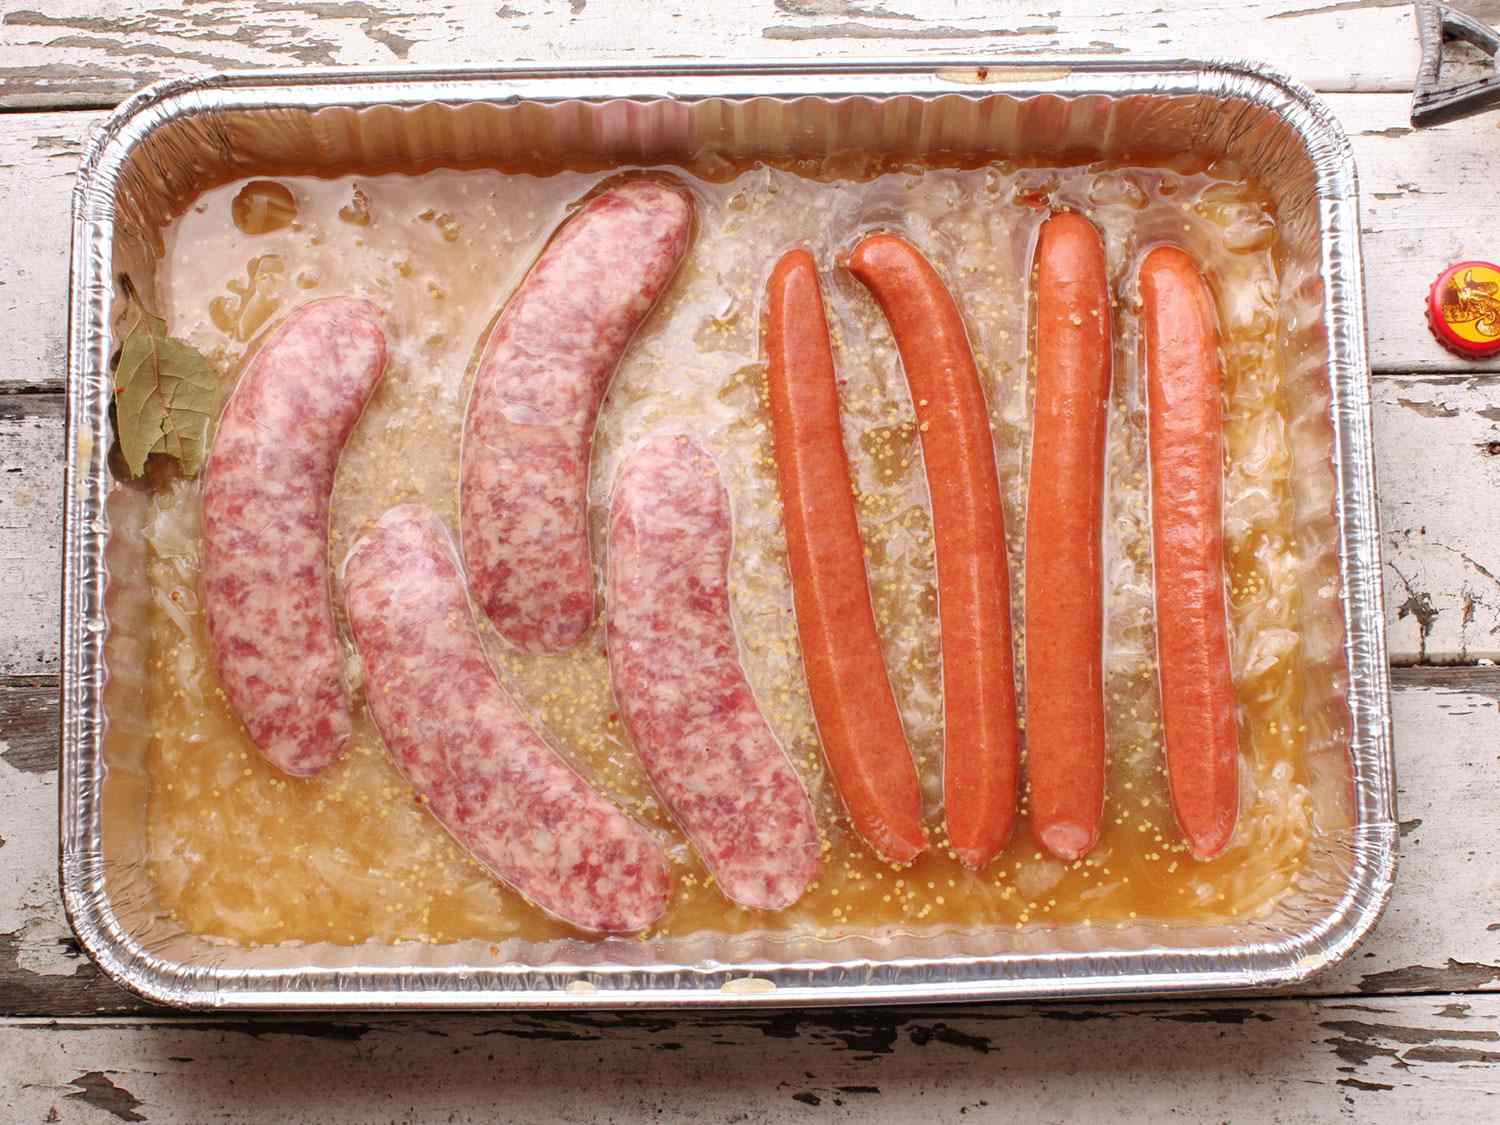 How to Cook Linked Sausage in the Oven